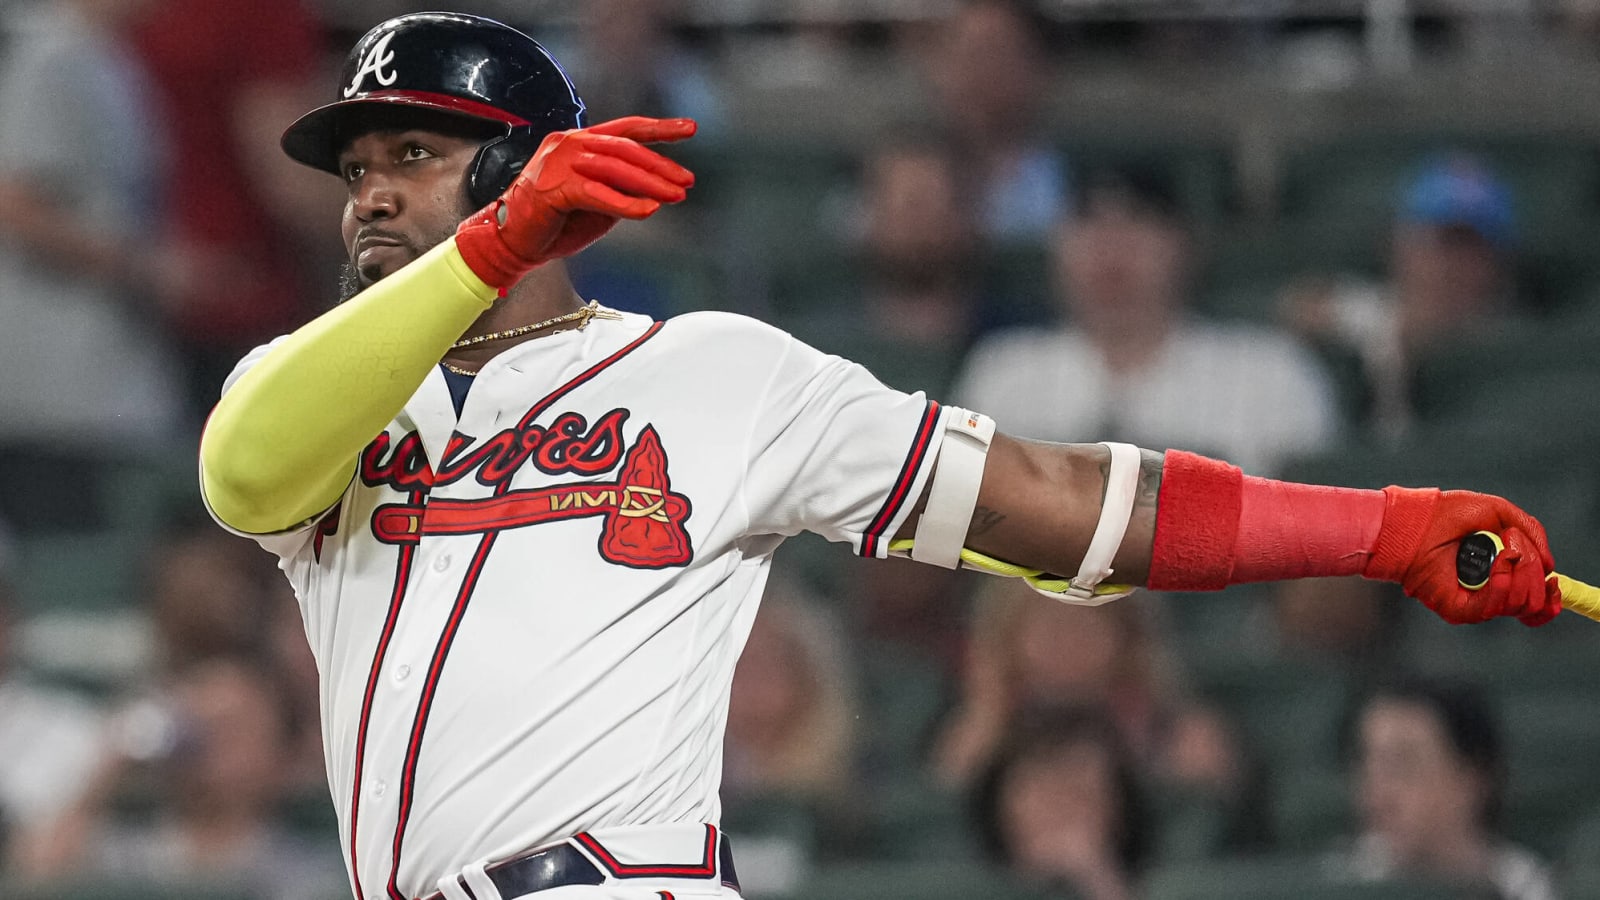 MLB Dinger Tuesday: Braves' Marcell Ozuna is on a roll